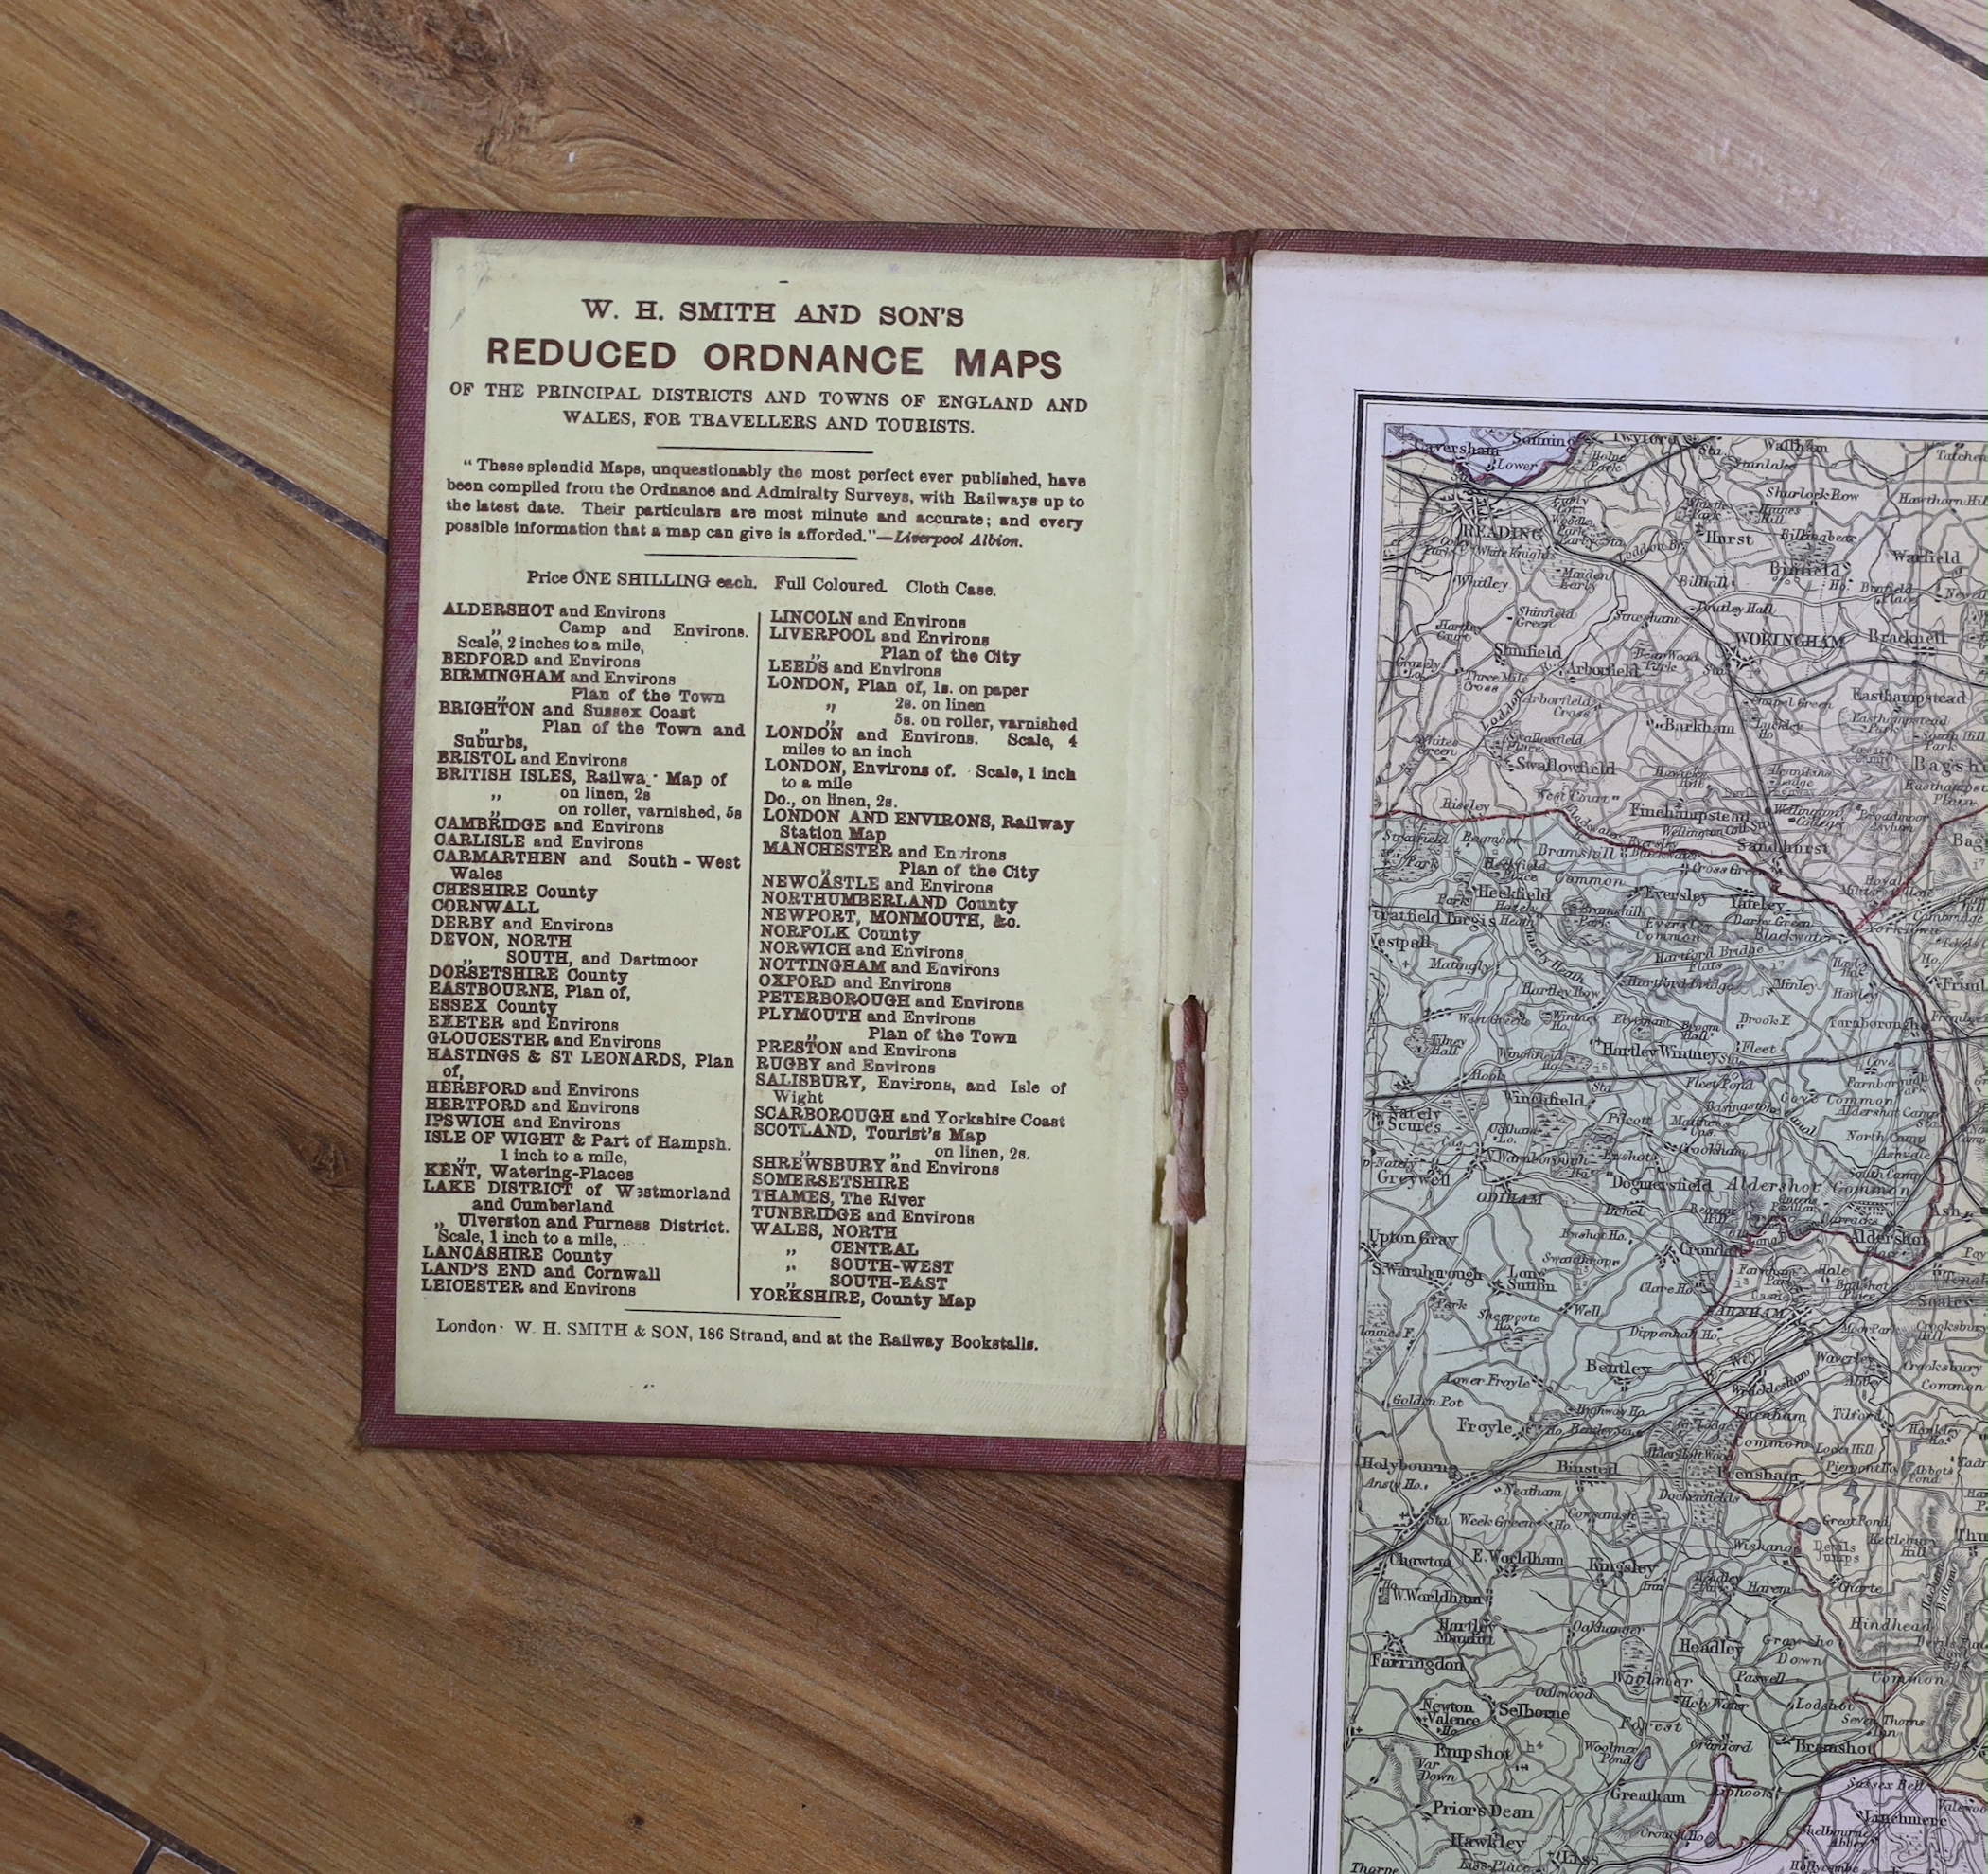 Six 19th and 20th century folding maps of Sussex; an Ordnance Survey (318), a W.H. Smith & Son map, a Smith & Son 172 Strand 1864, two Walker’s County Maps, and a Kelly’s Map